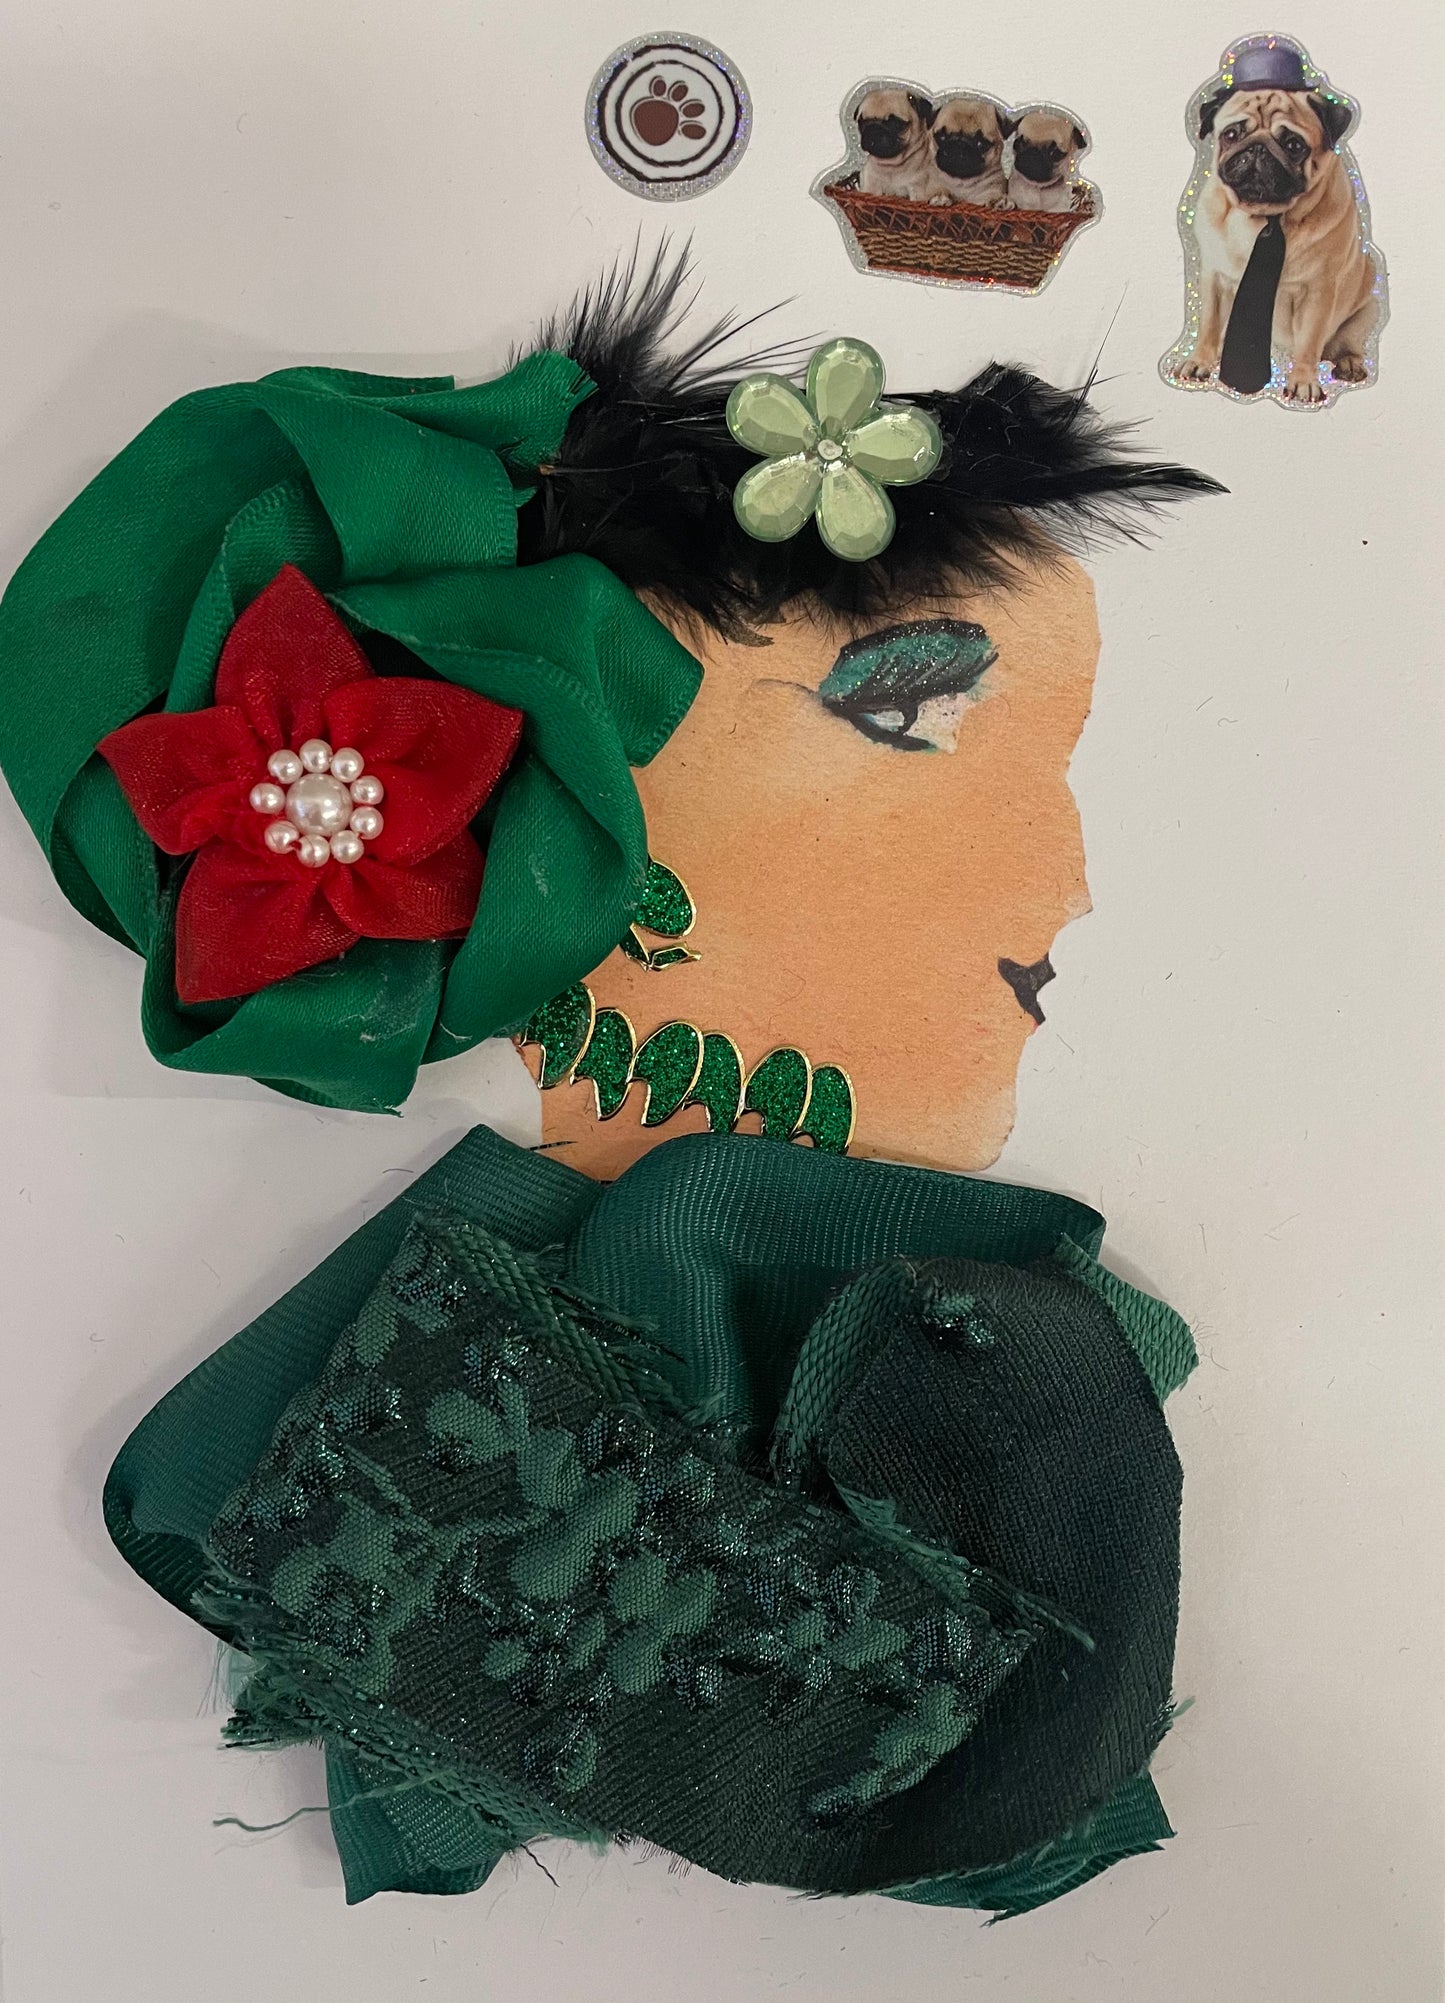 is wearing an emerald green blouse with a bright green hair accessory with a red flower on top. There is also a light green flower in her hair. She has a matching glittery green necklace and earrings. There is a paw sticker, 3 pugs together sticker and a dog with a tie and hat sticker! 